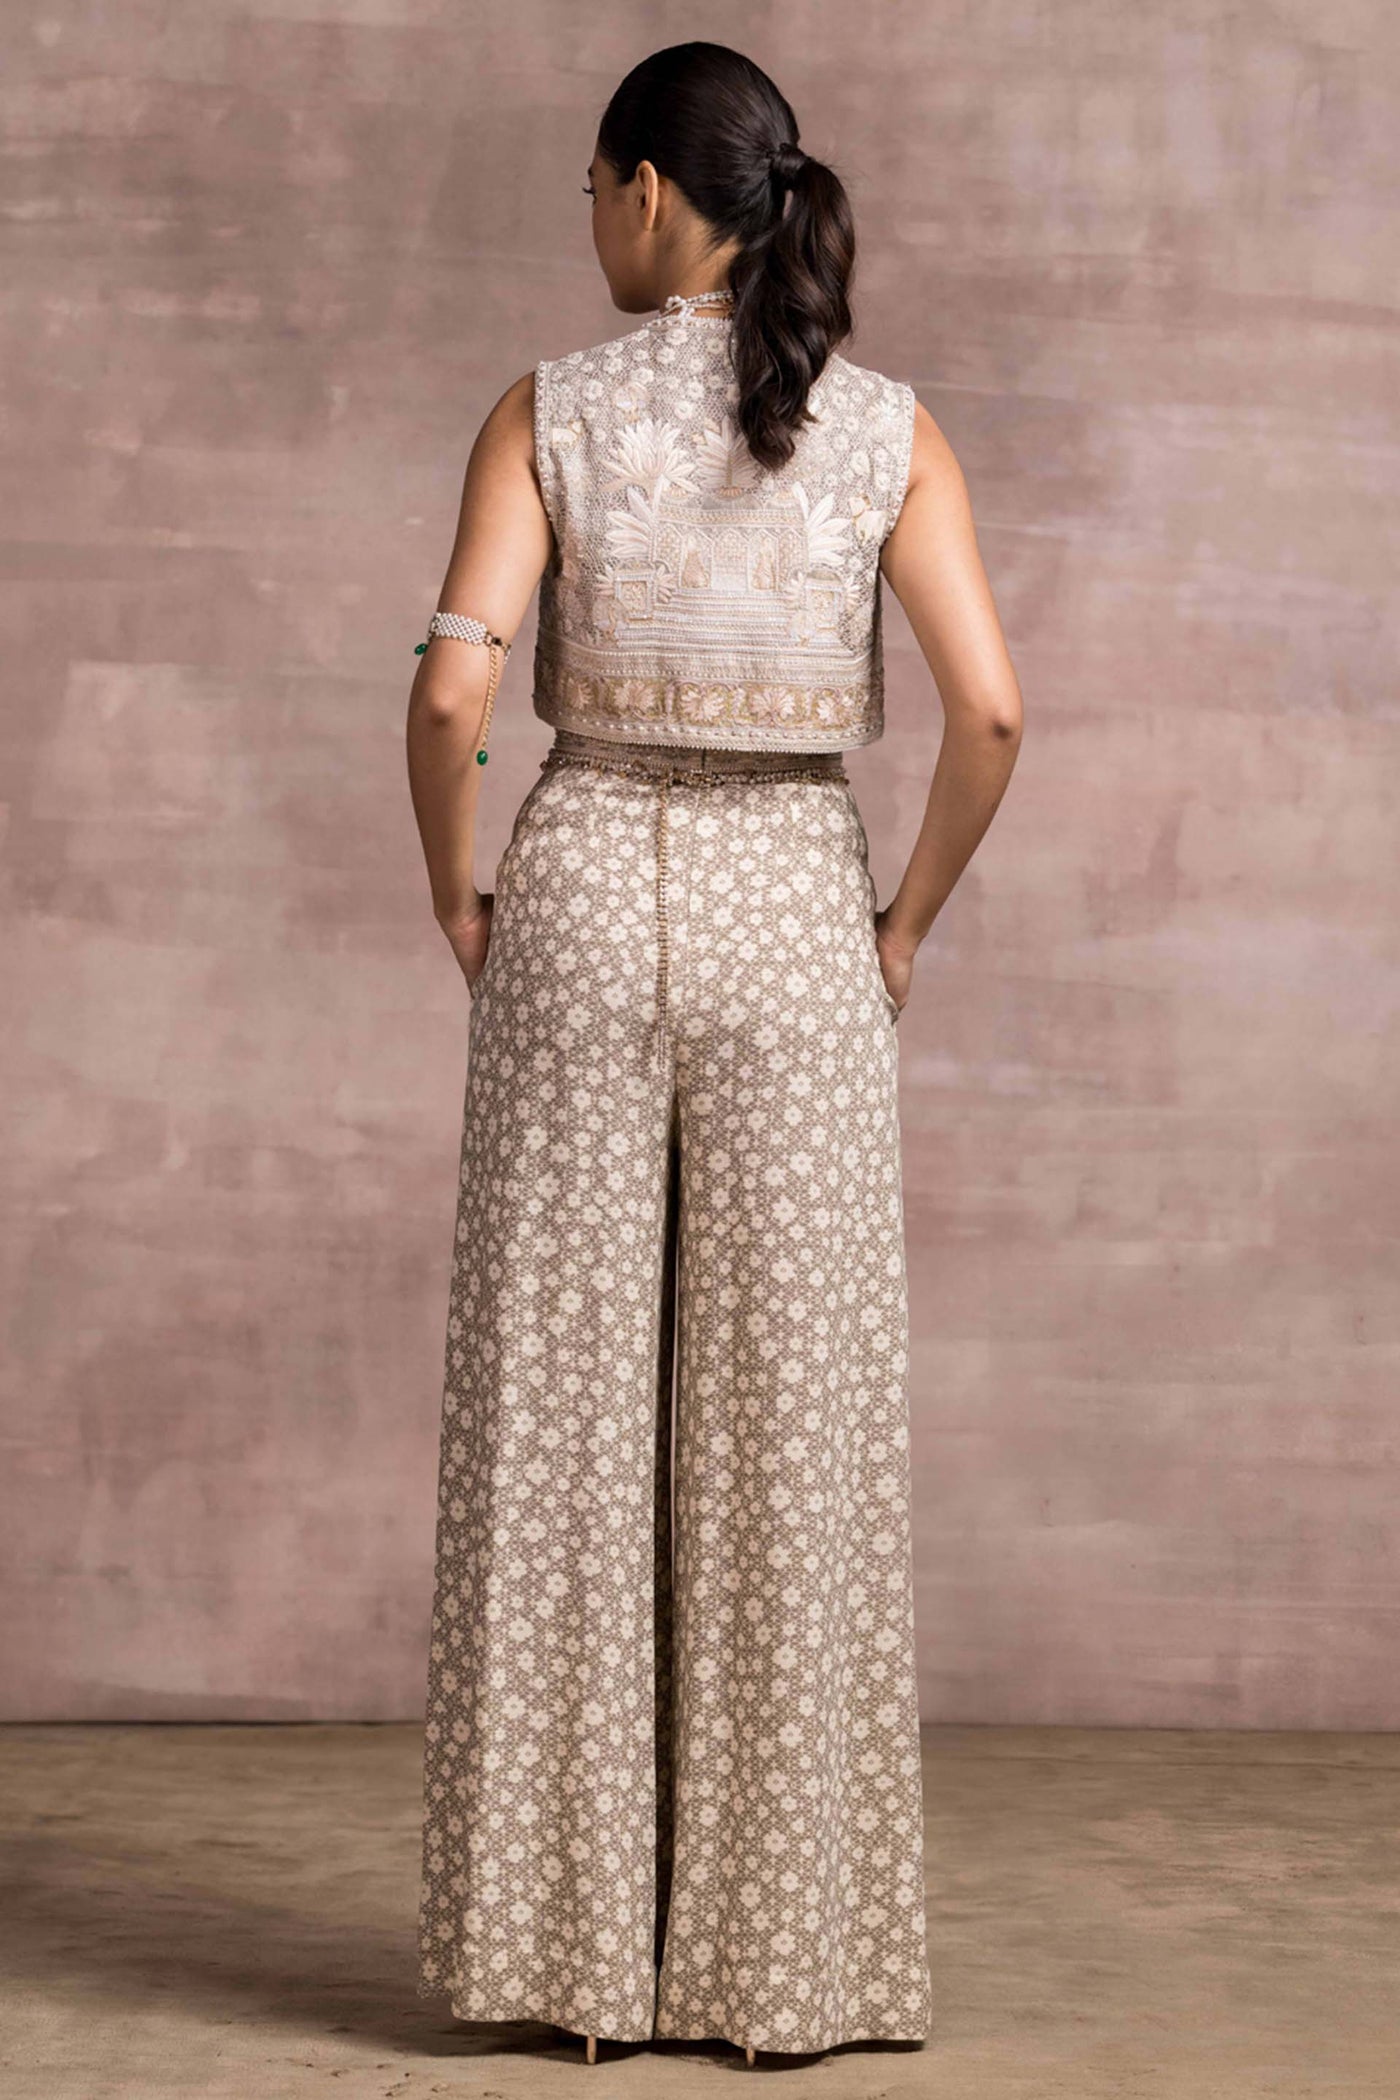 Tarun Tahiliani Pichwai Printed Jumpsuit With Pockets And Matching Embroidered Cape occasion indian designer wear online shopping melange singapore